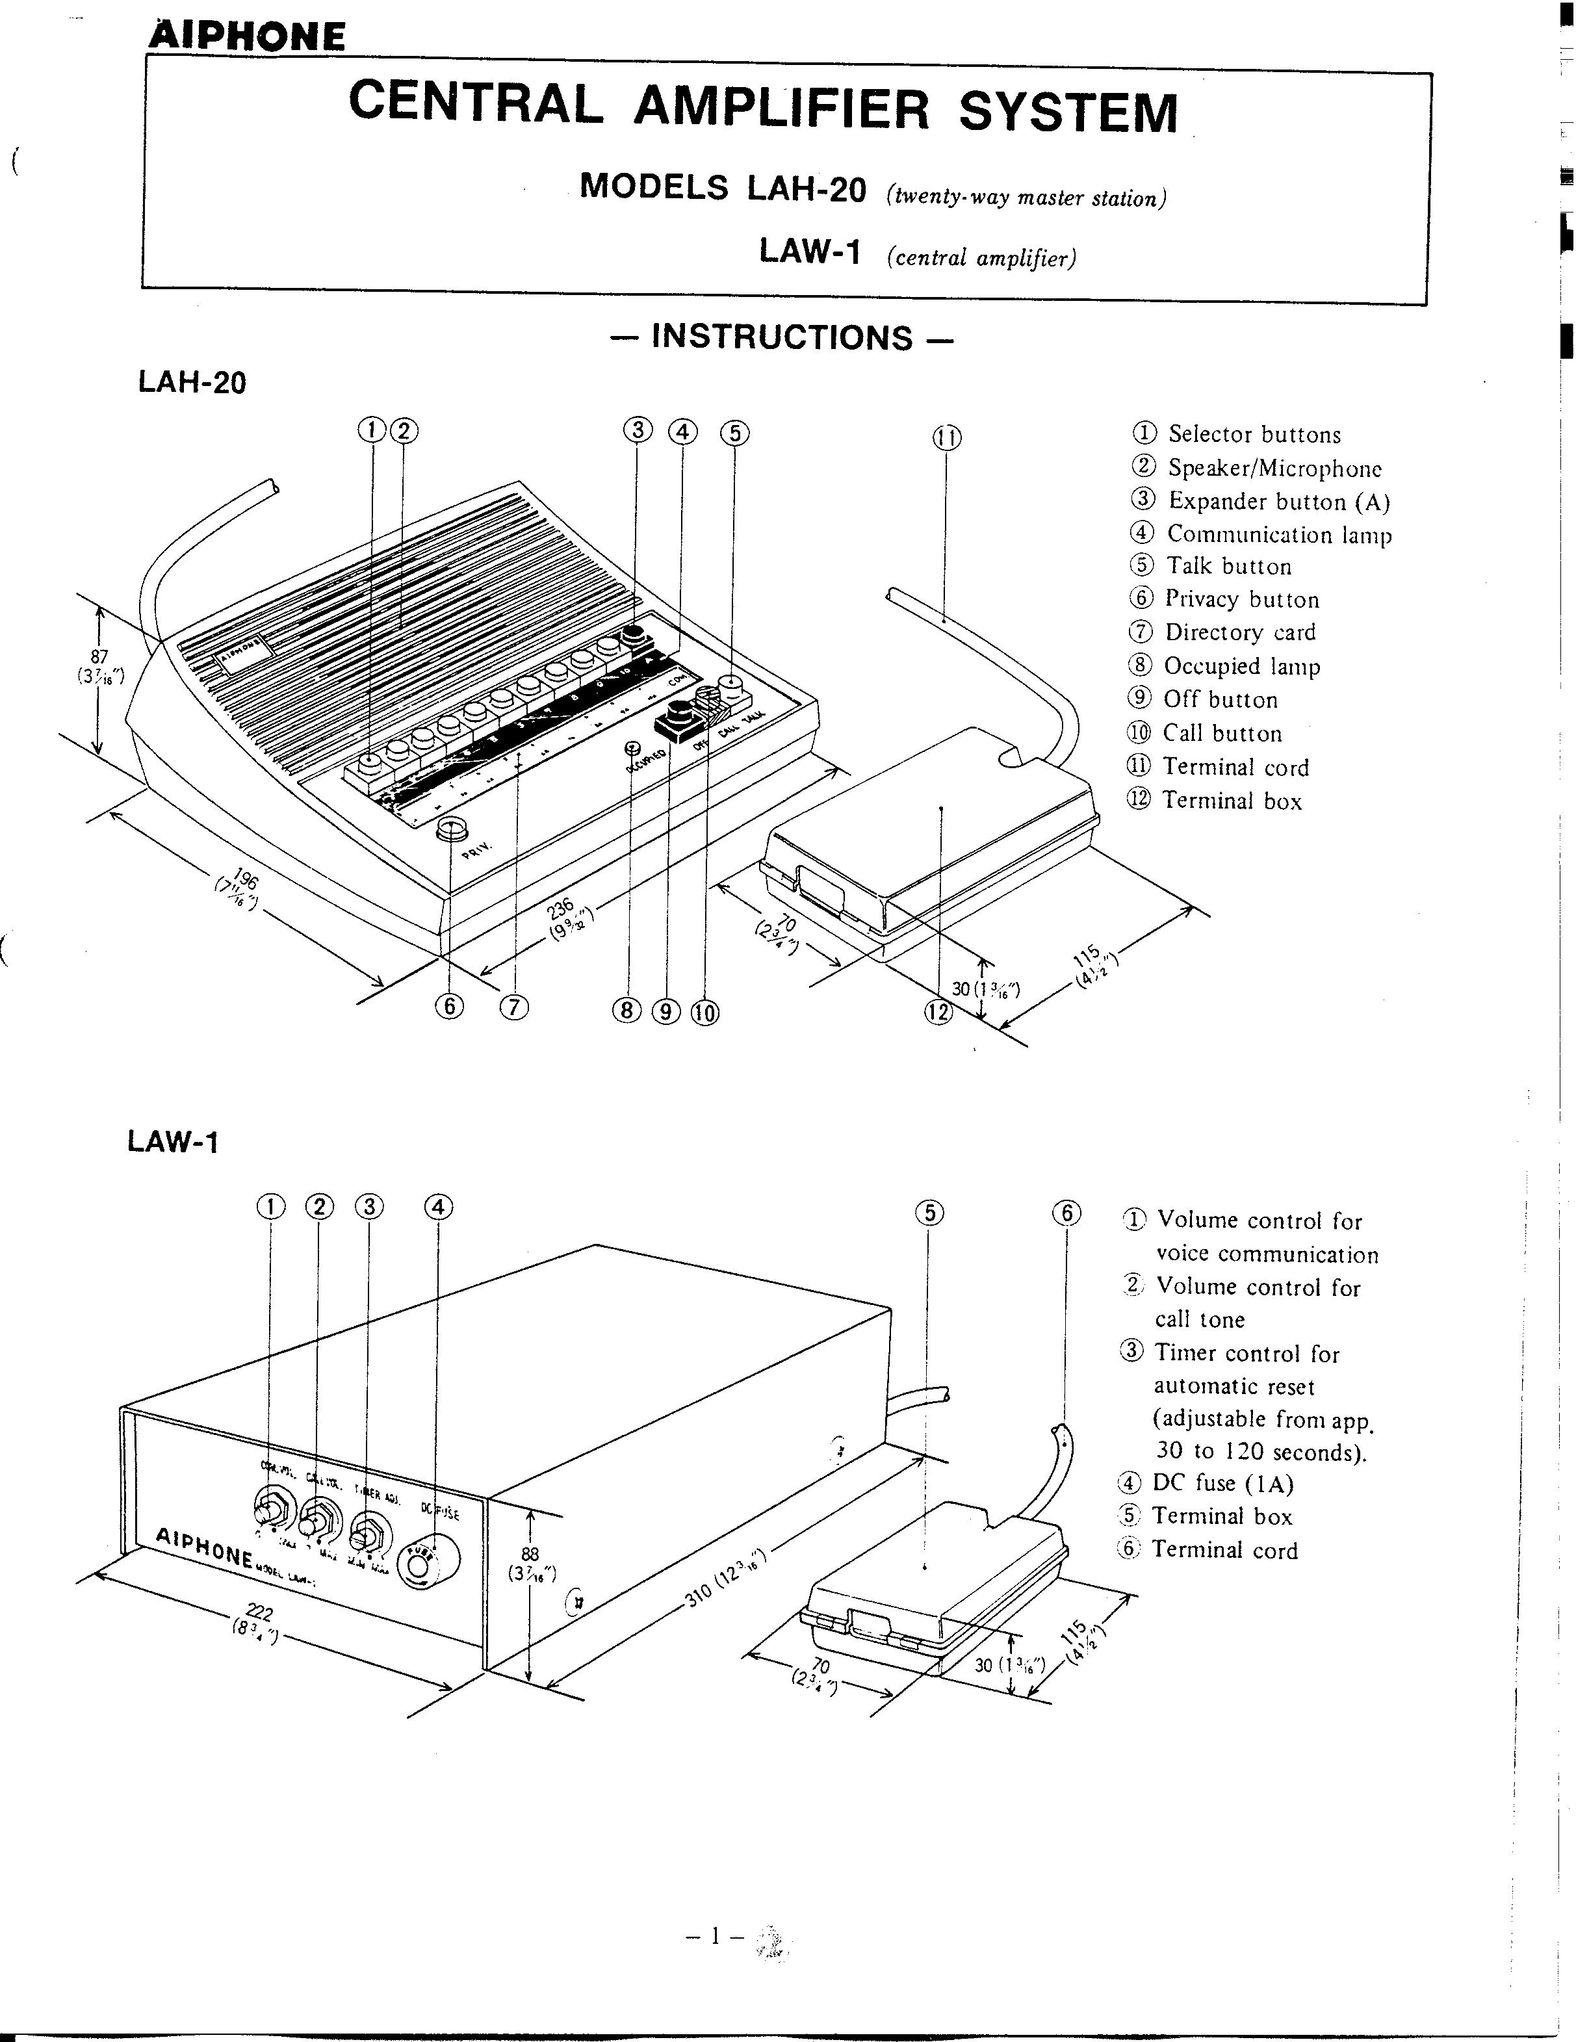 Aiphone LAW-1 Stereo Amplifier User Manual